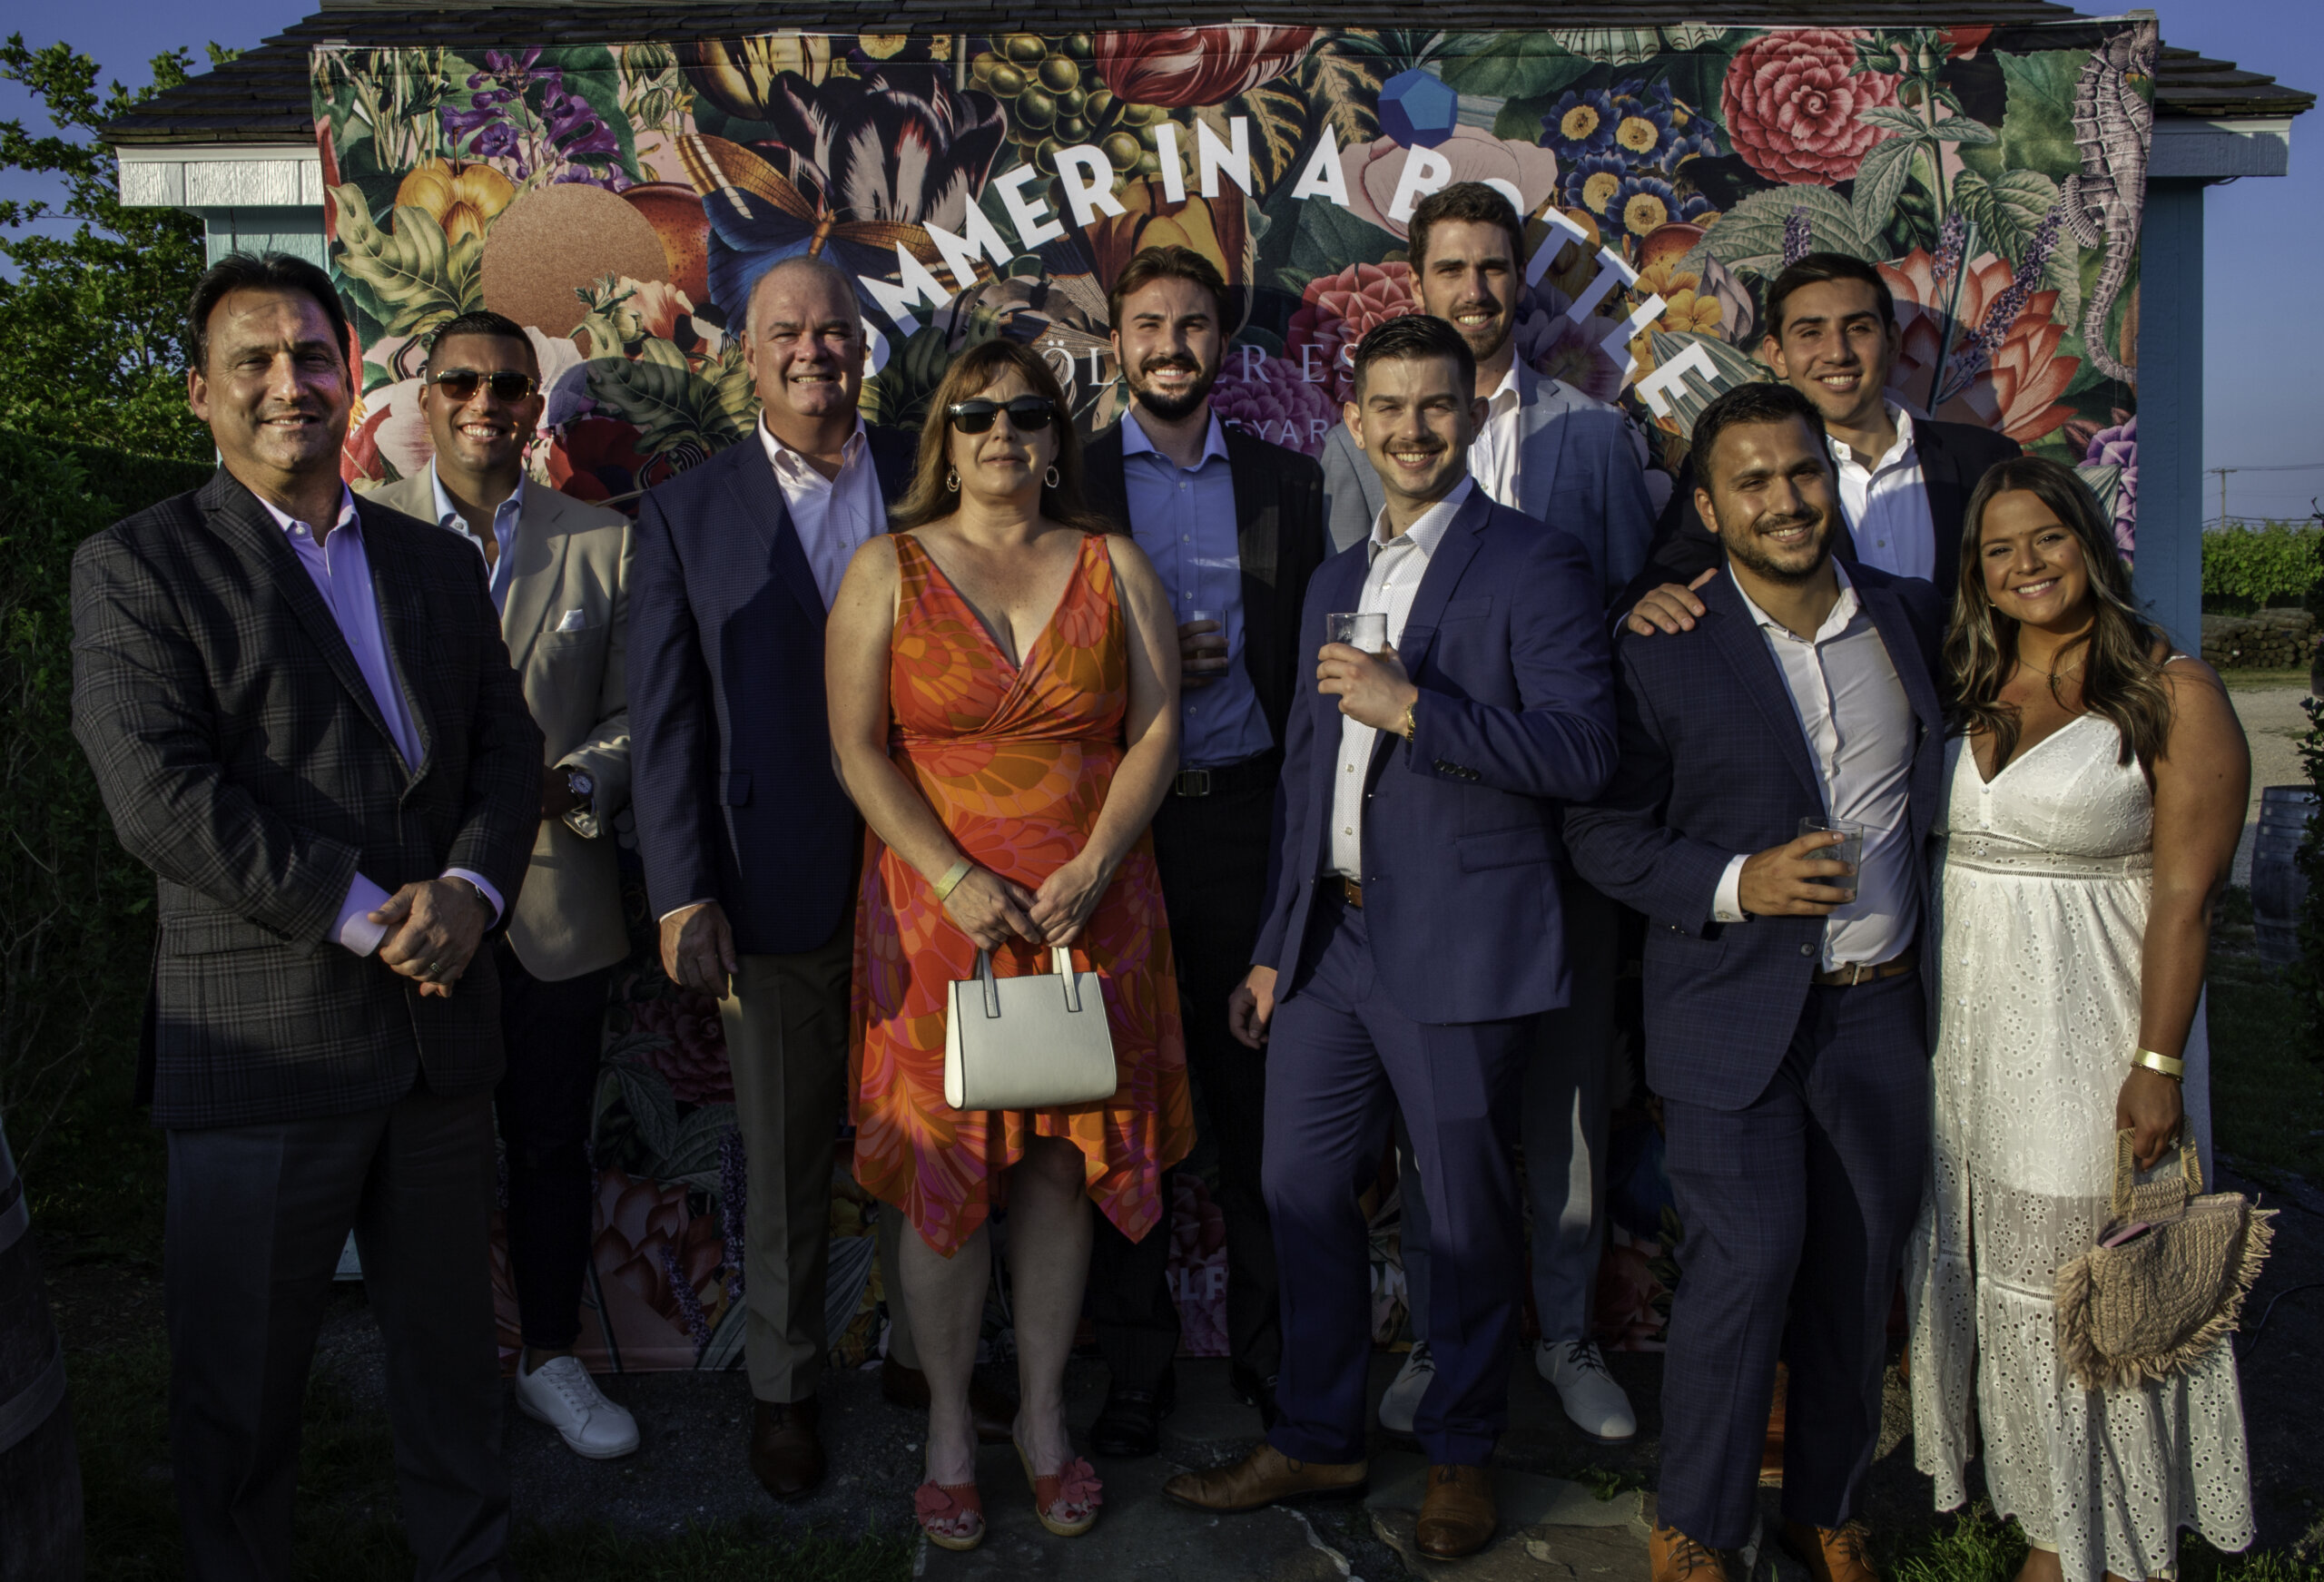 DSJ, Bob Jahelka, Anthony Perrone, Annie Phillips, Mike Becarris, Vincent Abbamonte, Colin McGee, Steven Liantonio, Anthony Scardino, Karie Liantonio at Wolffer Estate's Heart of the Hamptons